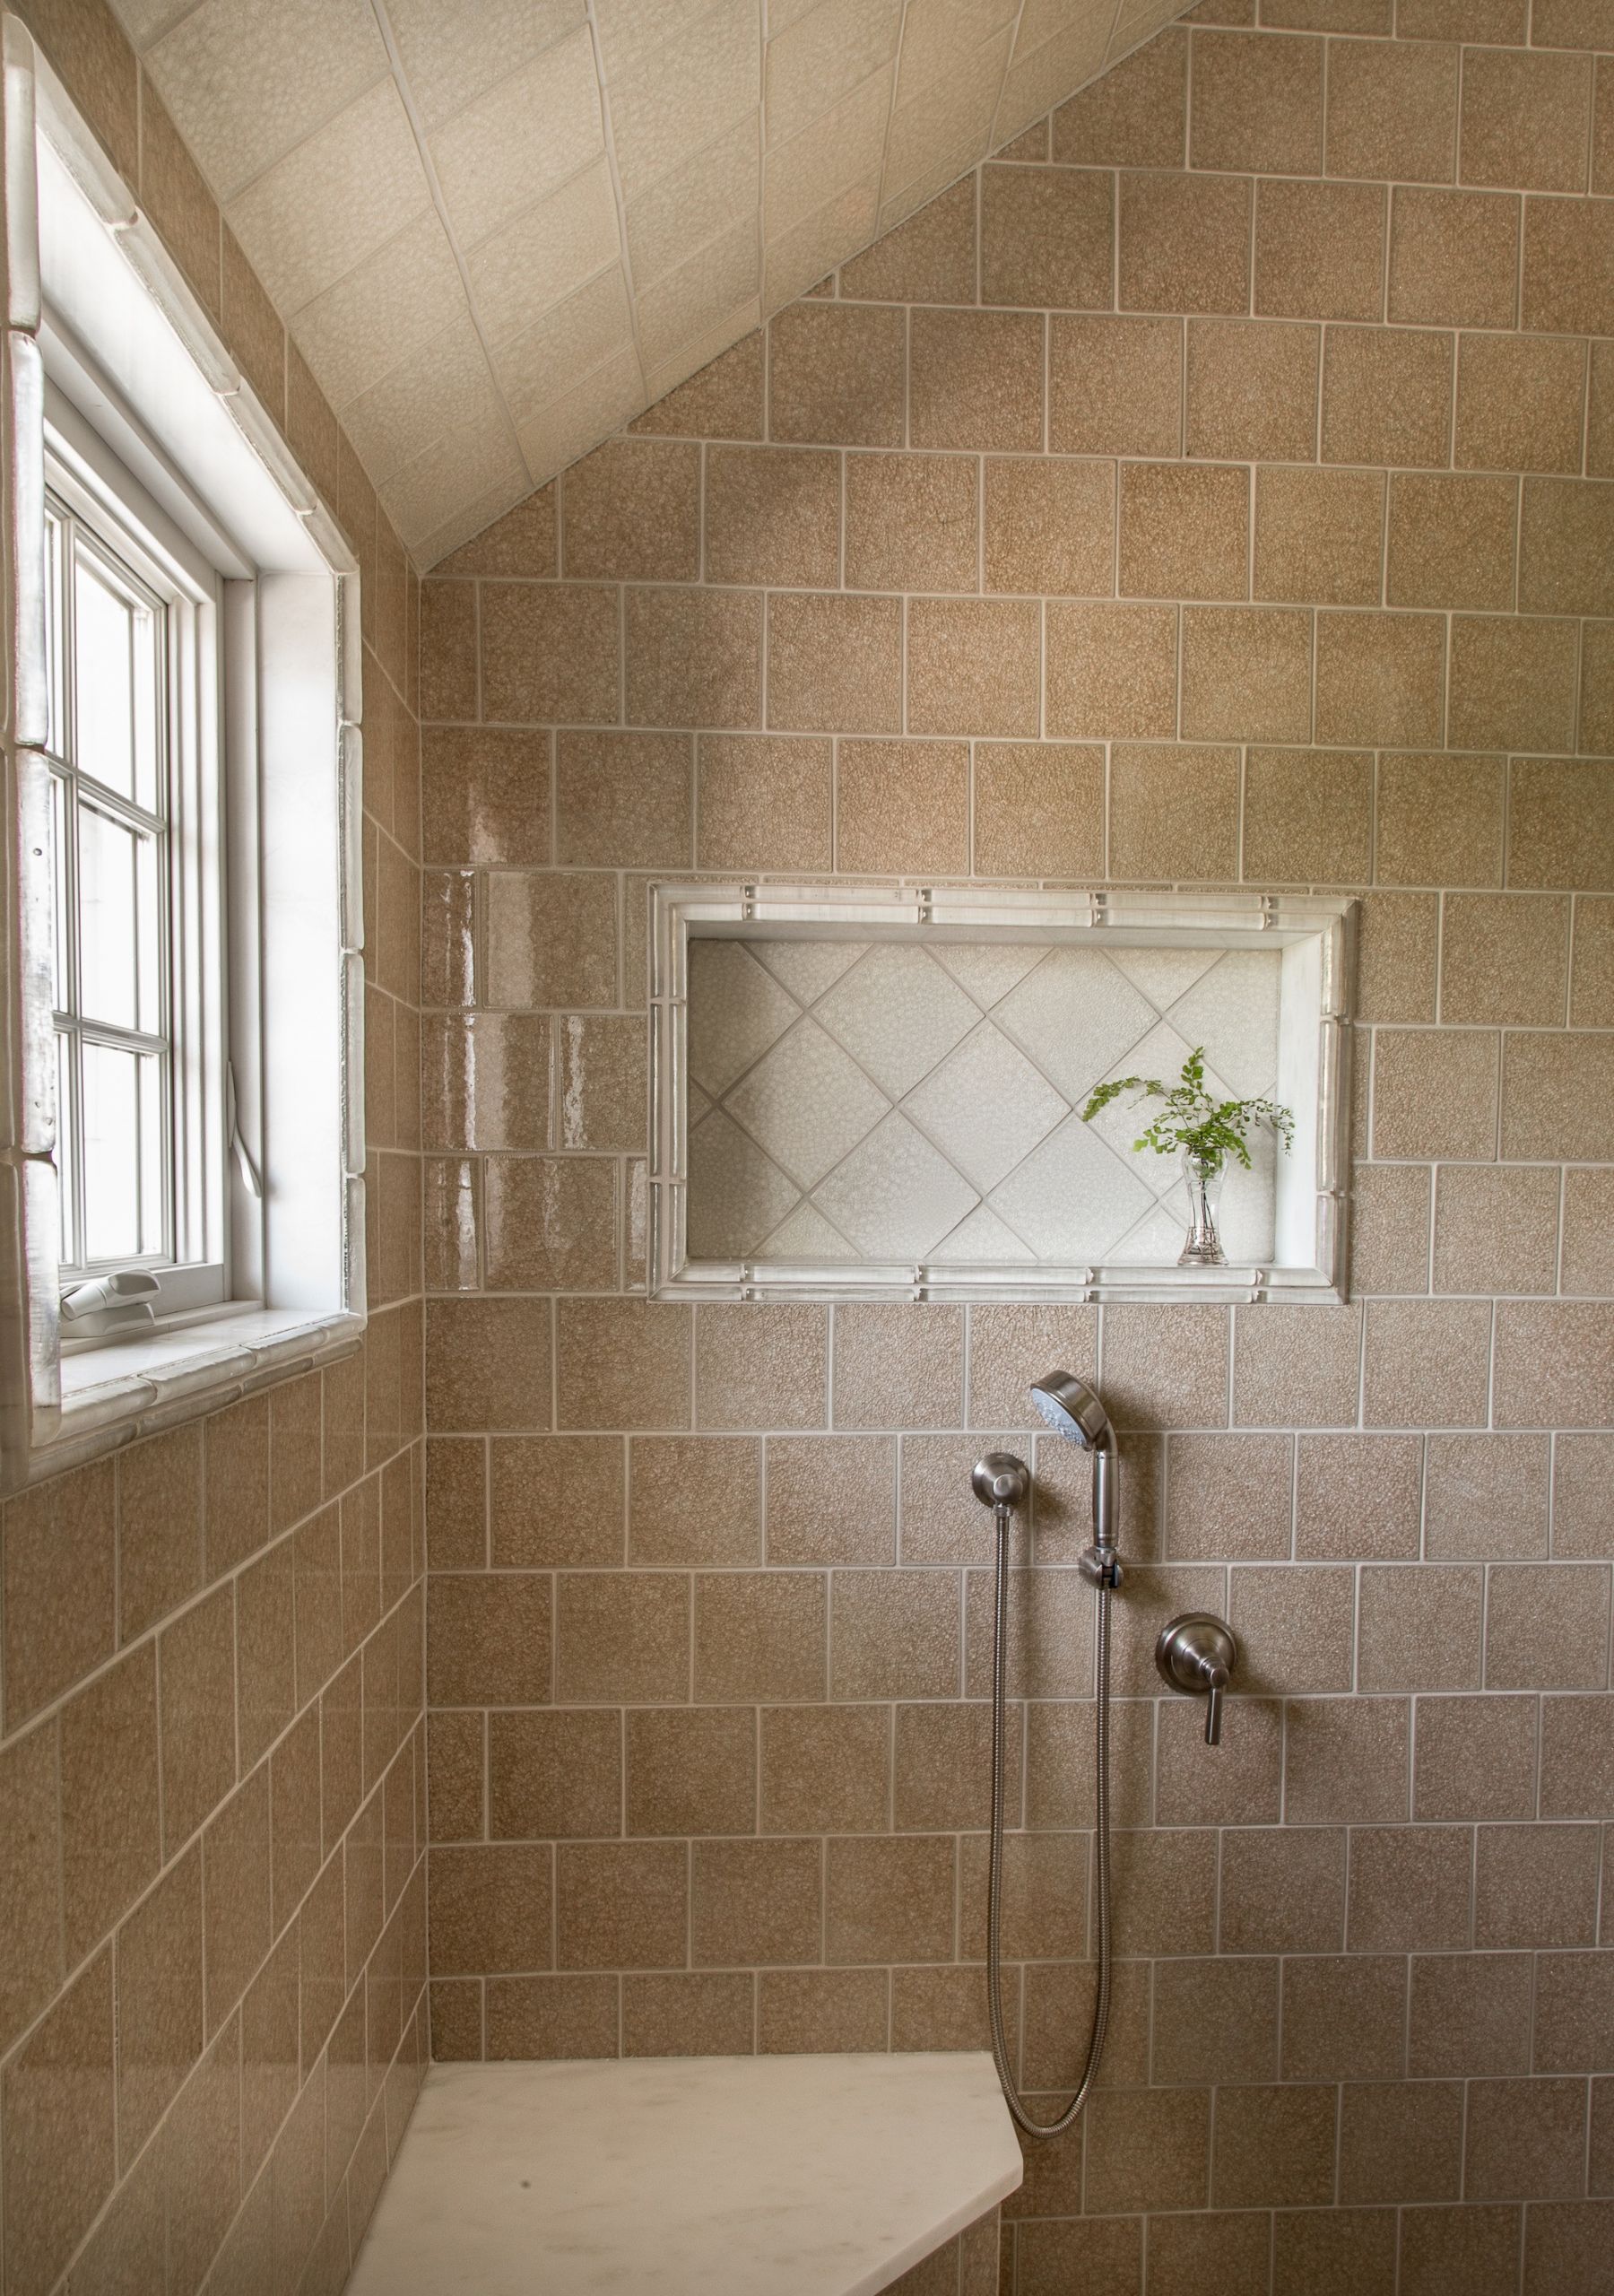 Stone Bathroom Tile
 Top Ten Trends in Tile and Stone Designs